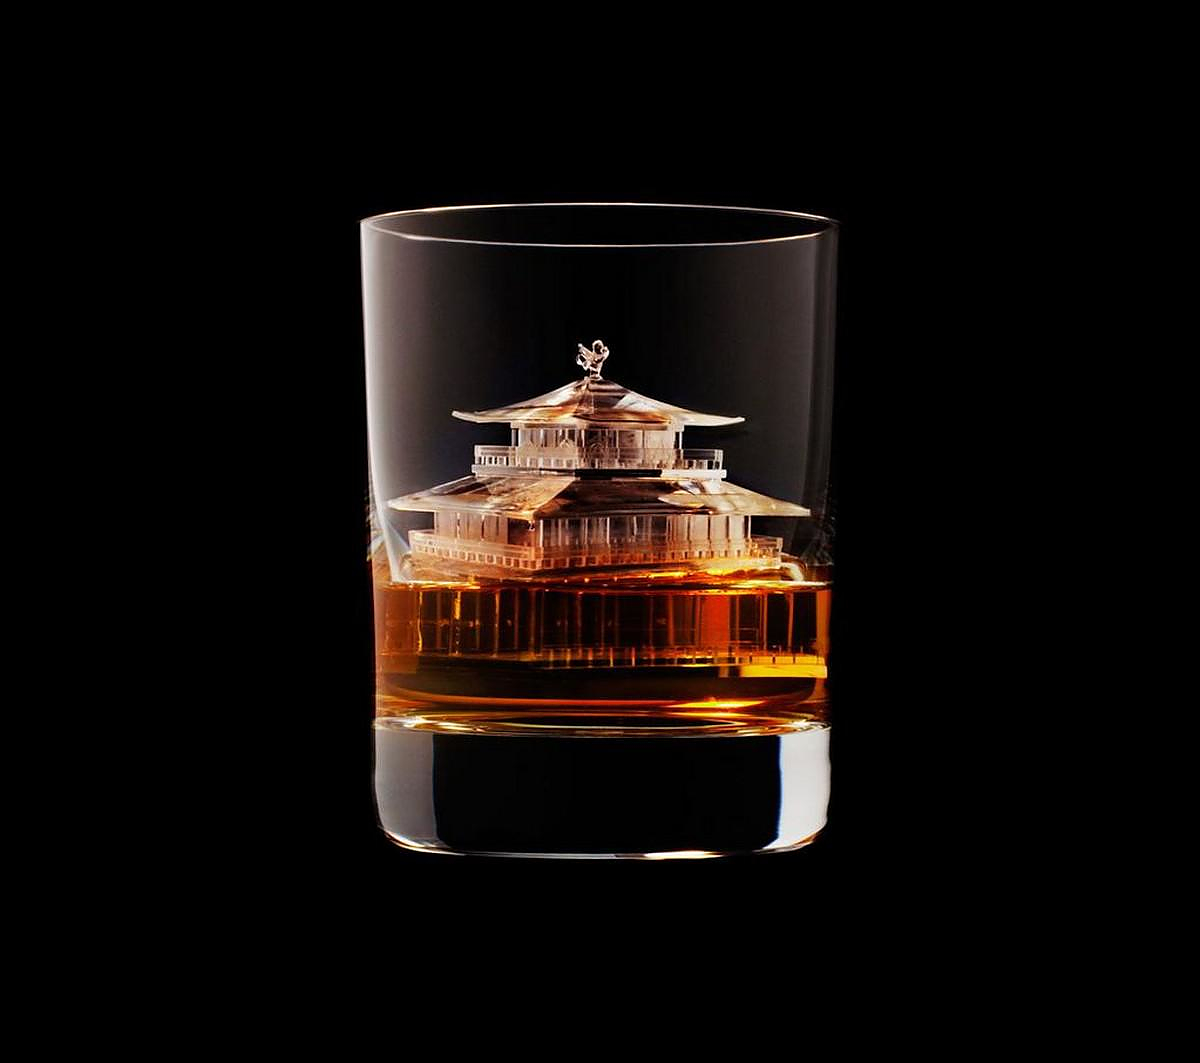 3D on the Rocks Ice Sculptures by Suntory Whisky.